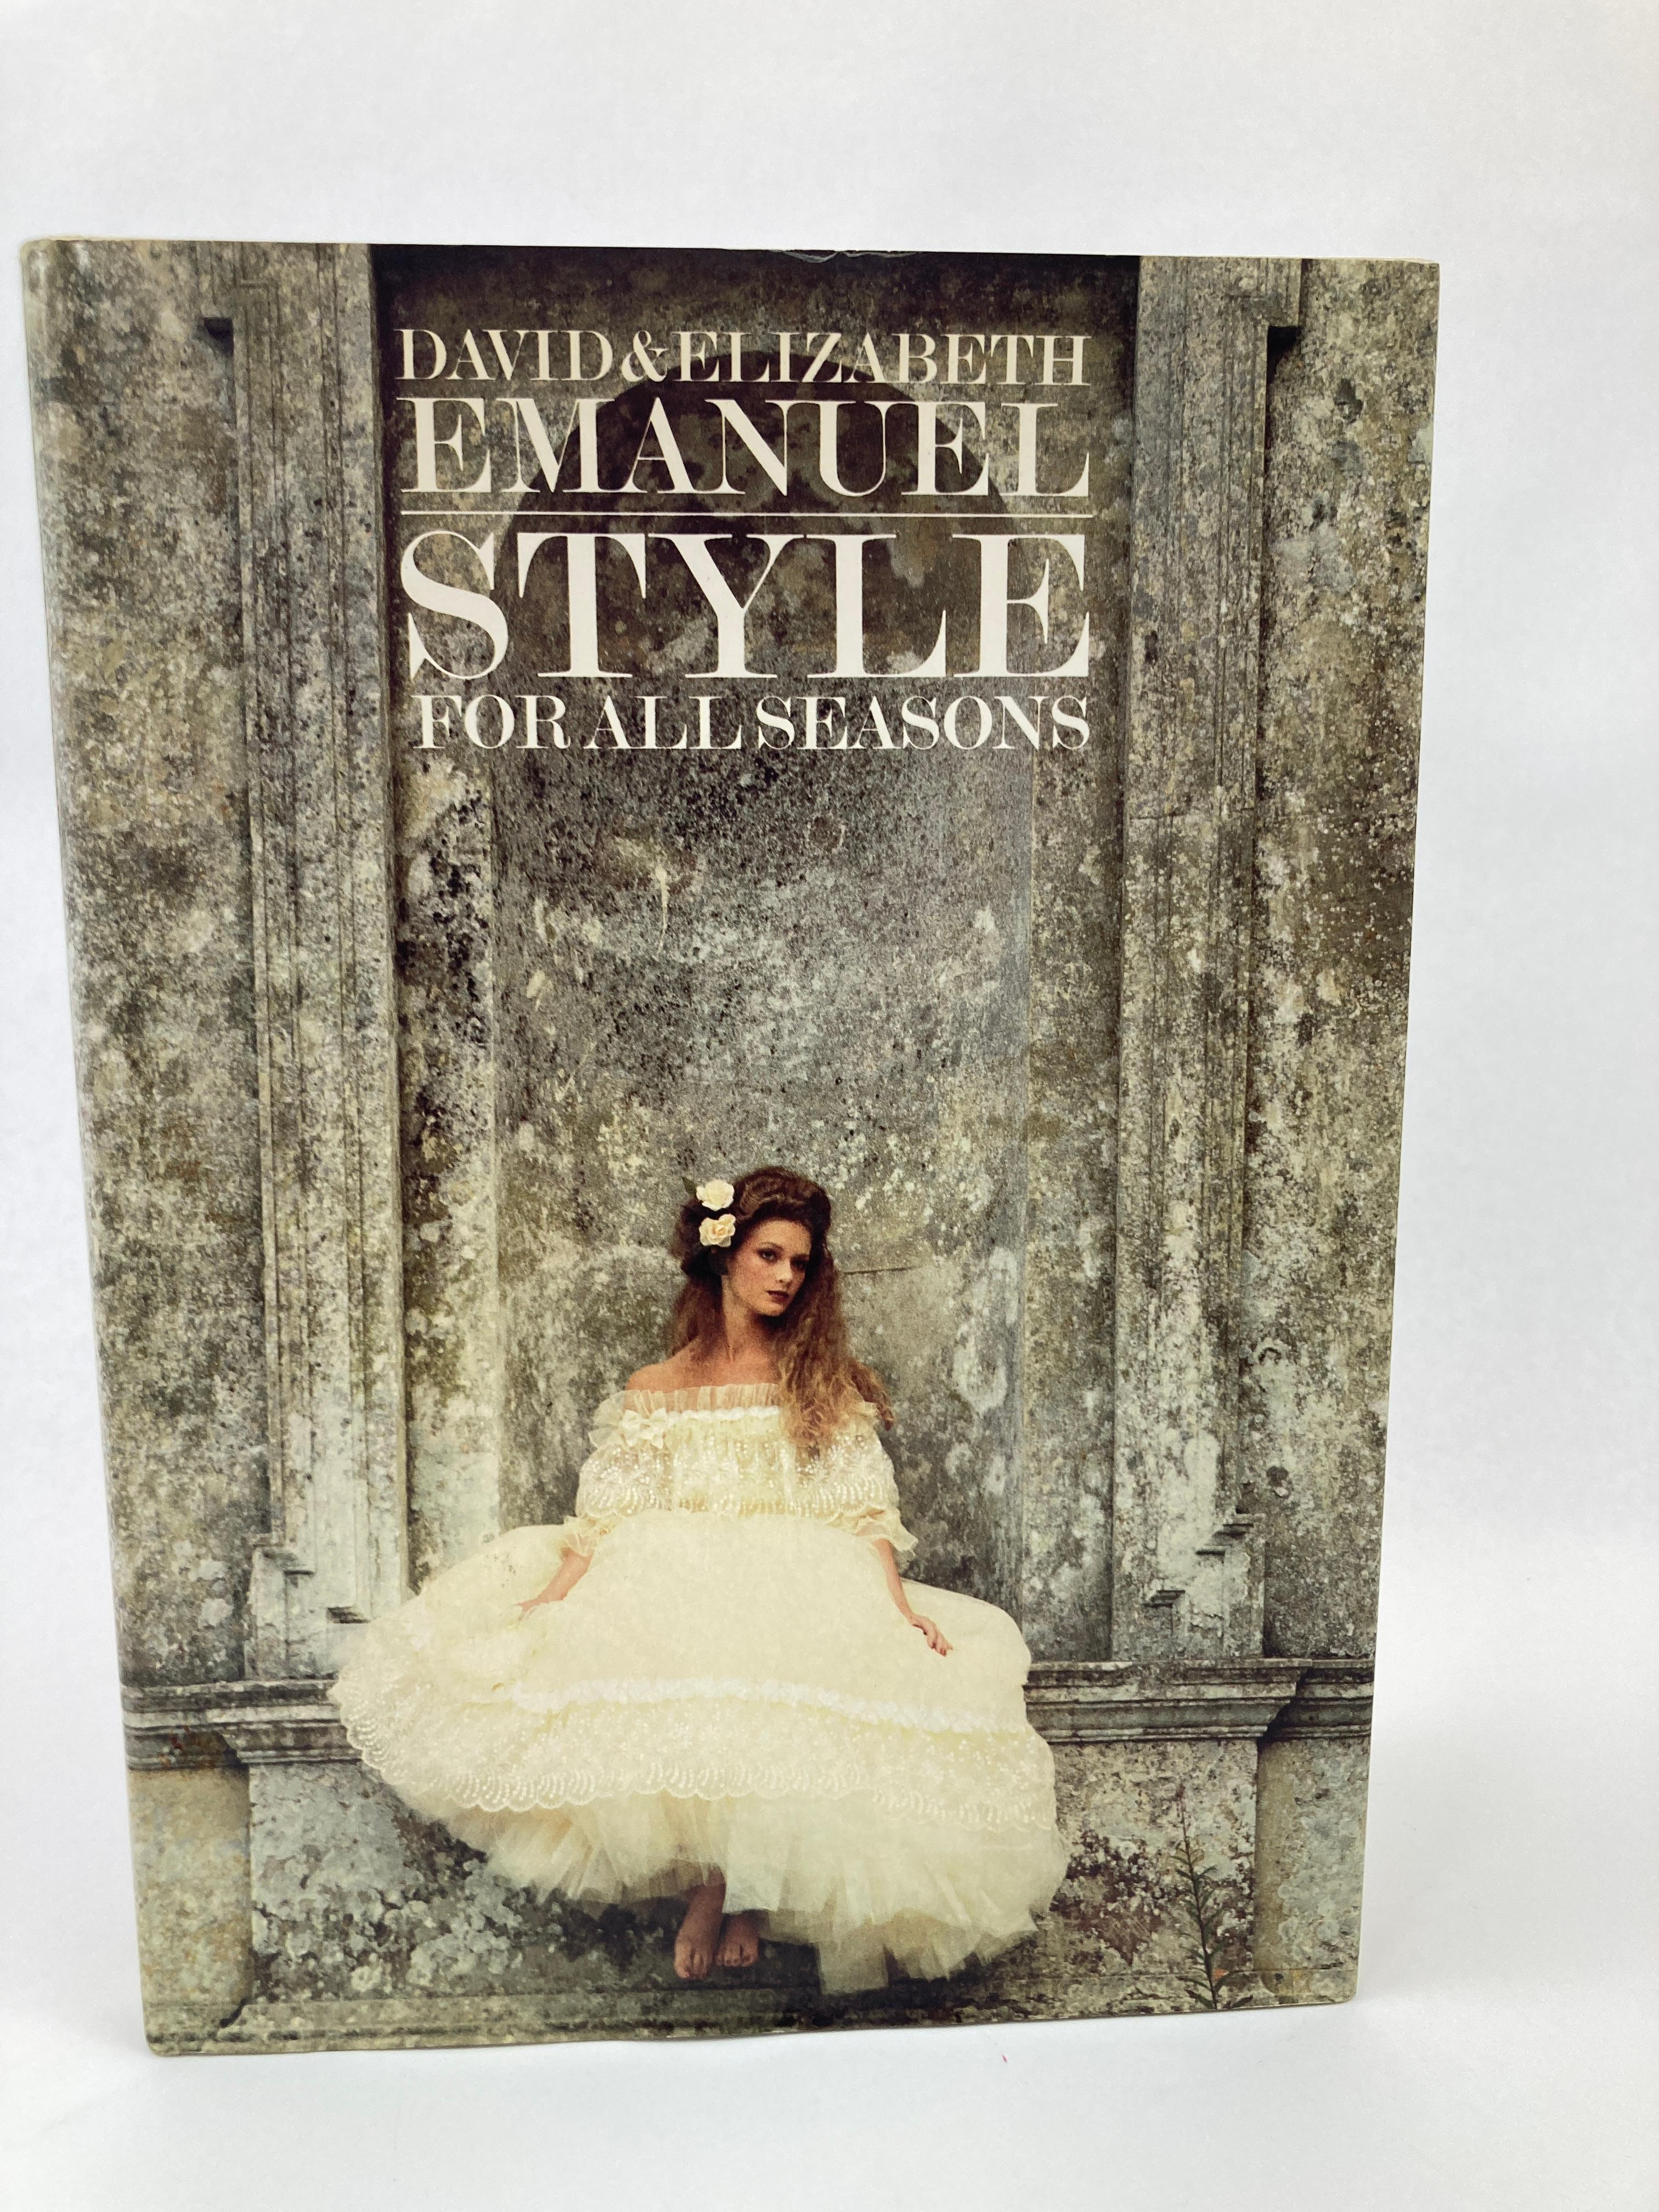 Style for all seasons Hardcover 1983 by Elizabeth and David Emanuel For Sale 1